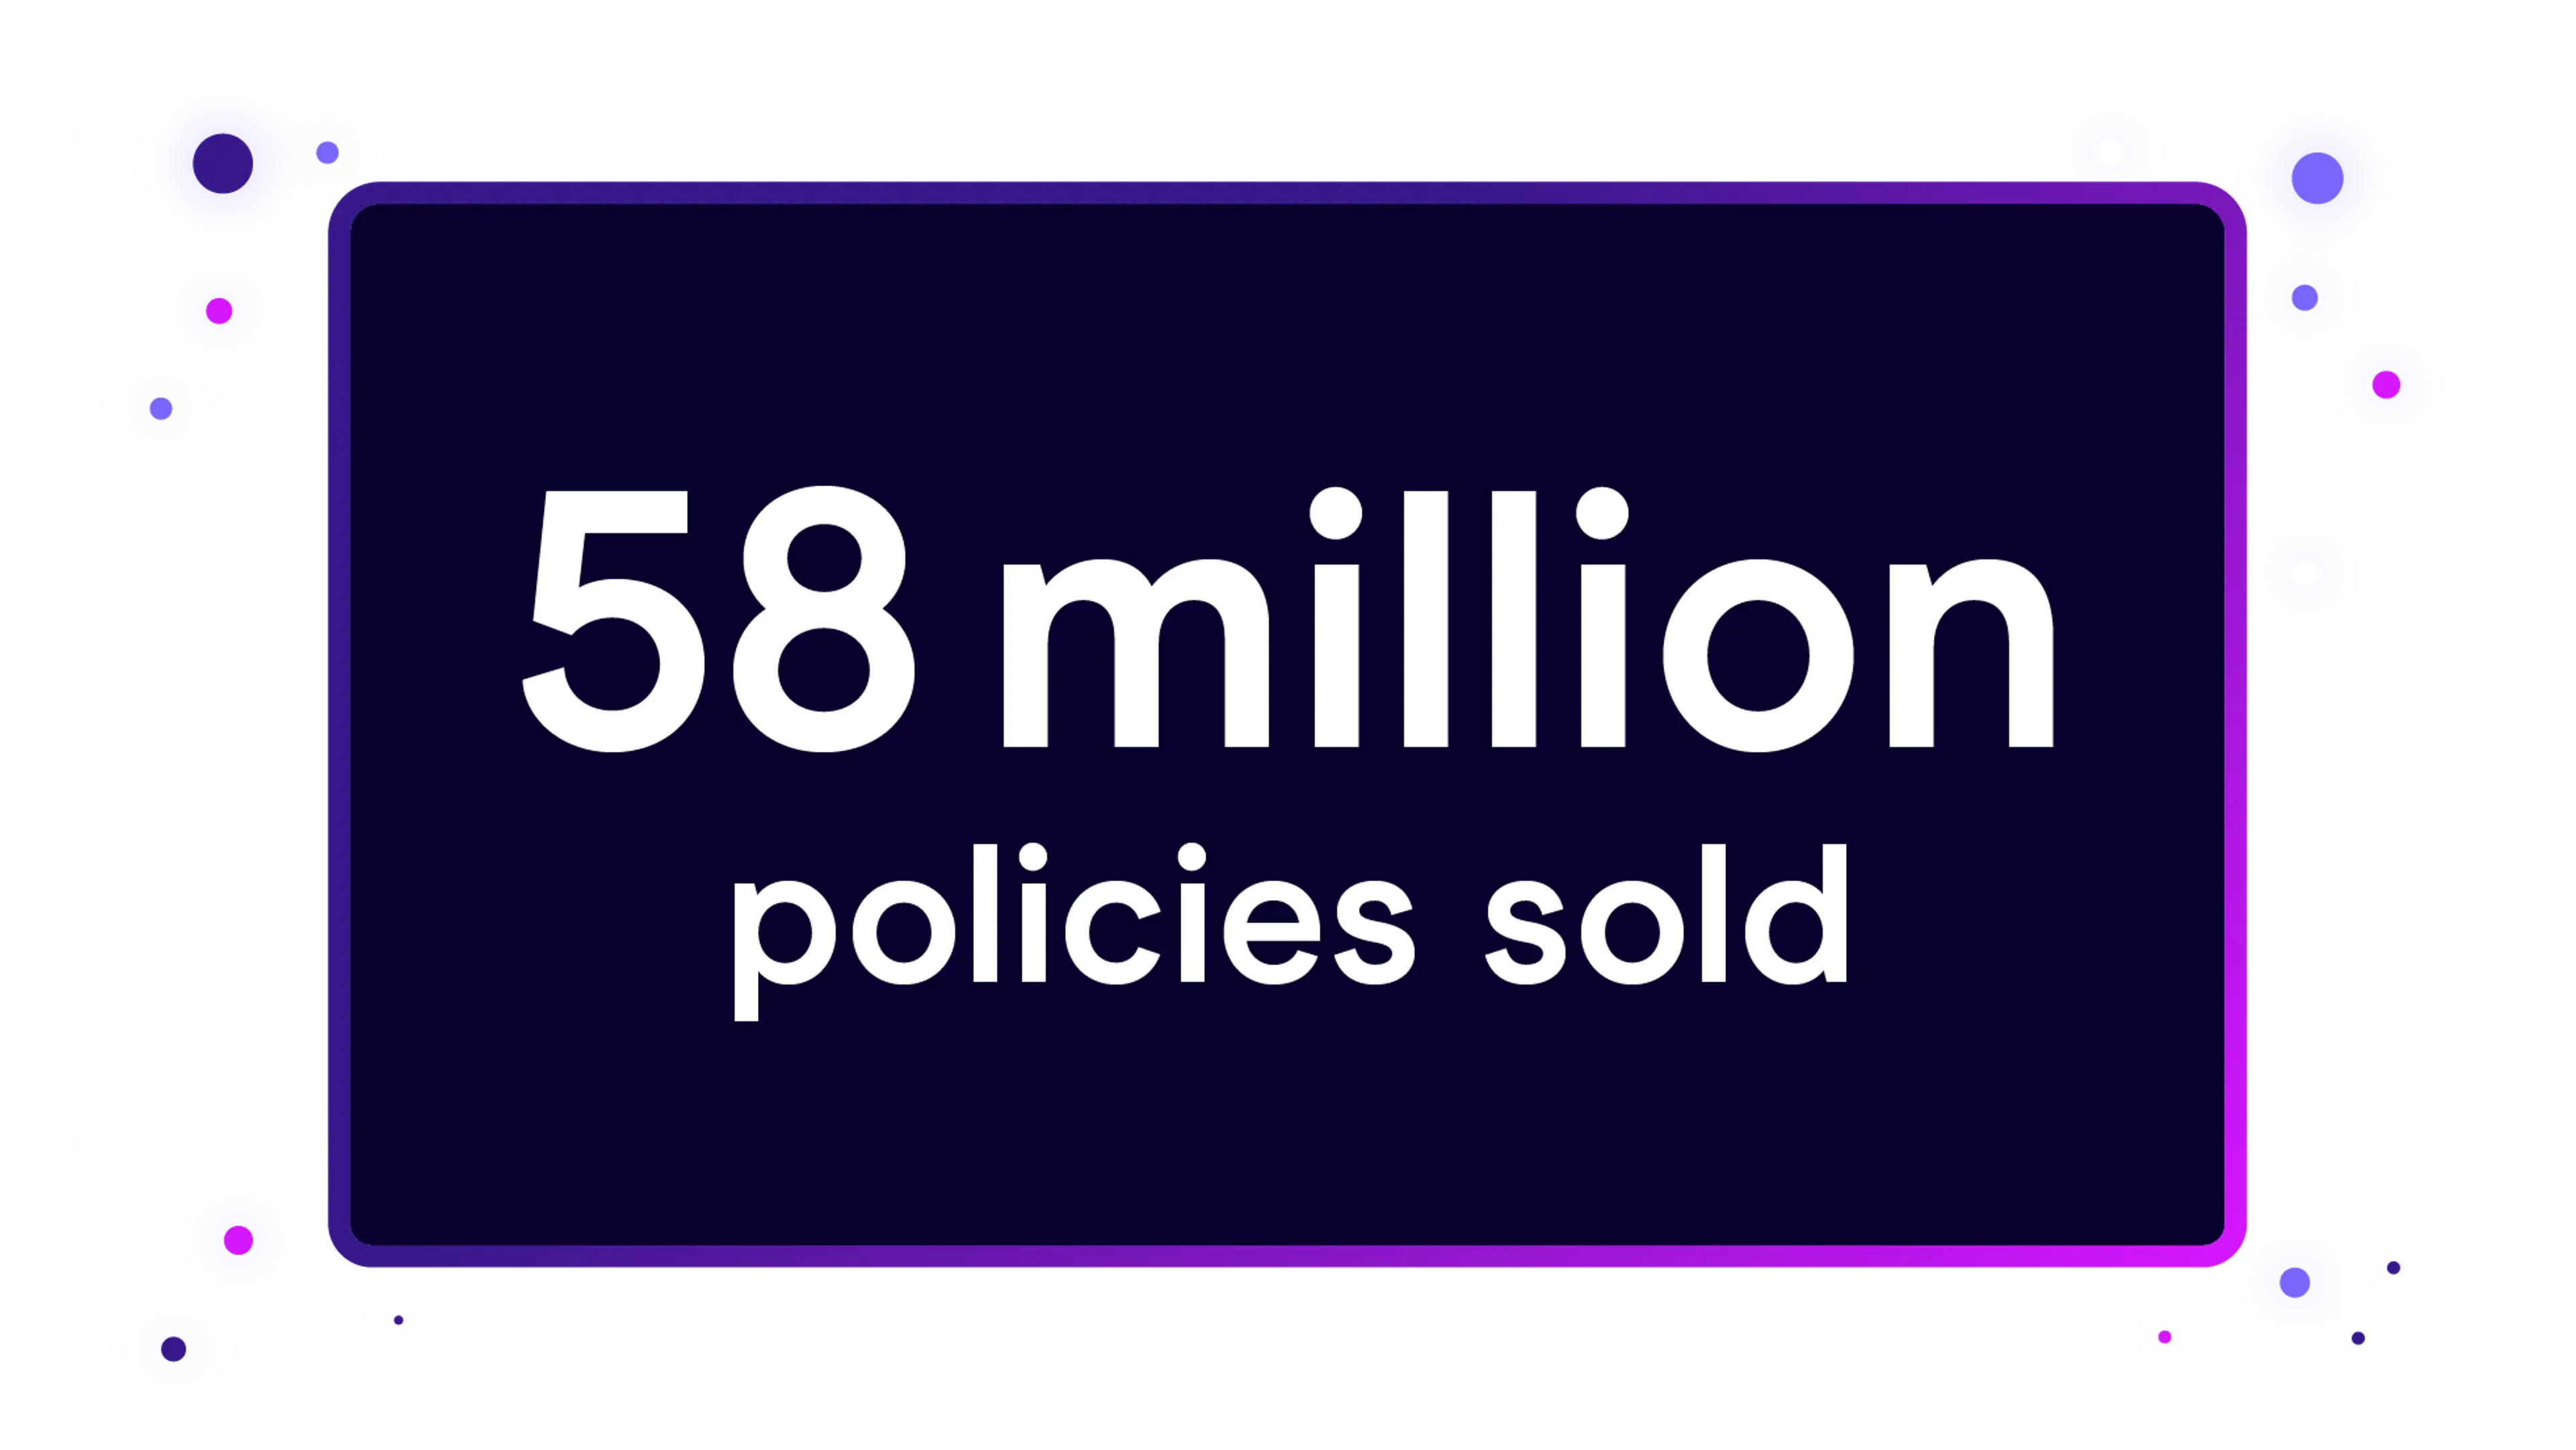 58 million policies sold